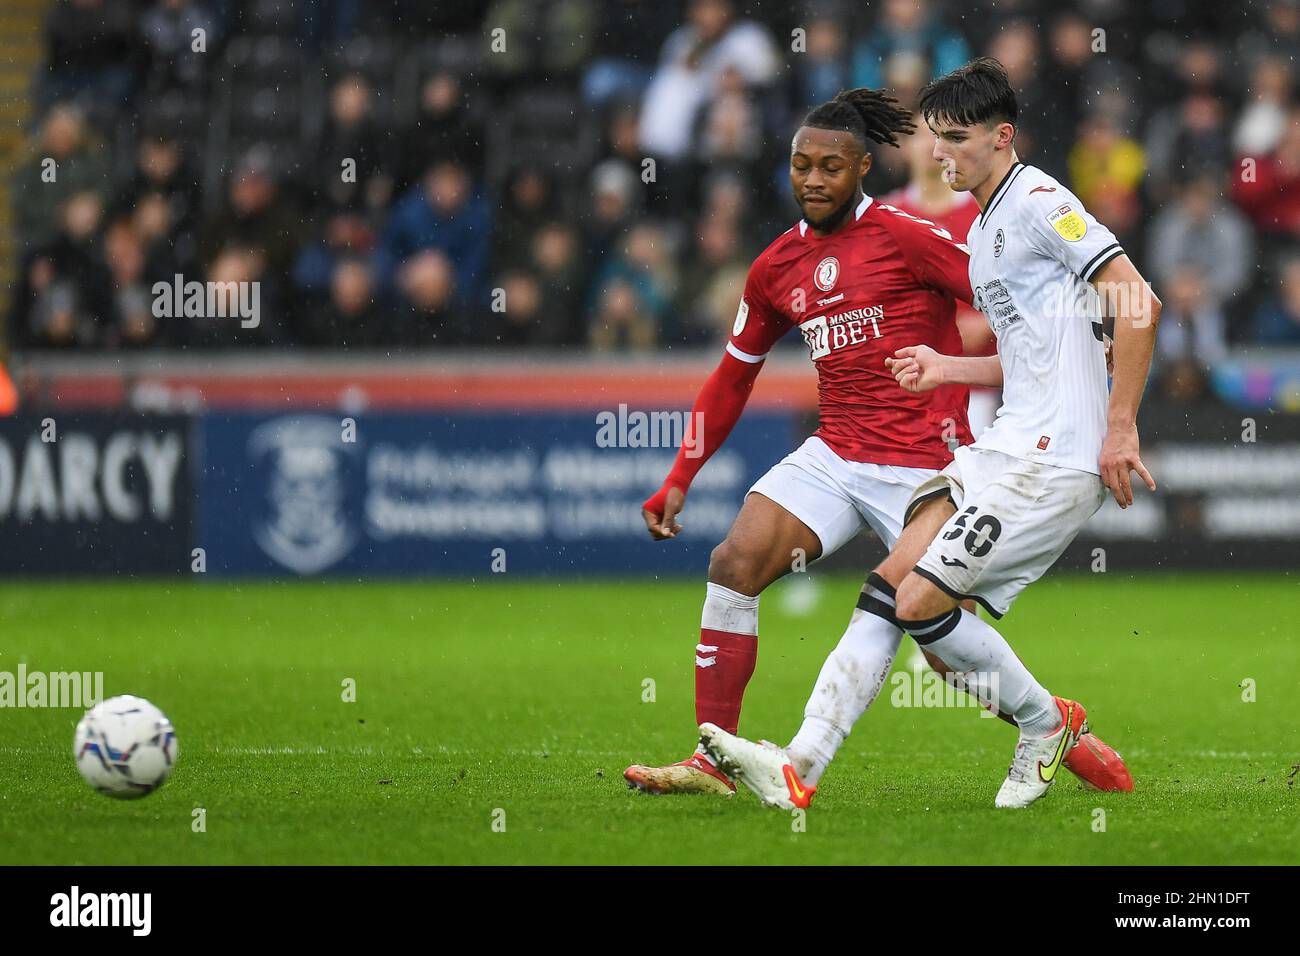 Swansea, UK. 13th Feb, 2022. Finley Burns #30 of Swansea City under pressure from Antoine Semenyo #18 of Bristol City in Swansea, United Kingdom on 2/13/2022. (Photo by Mike Jones/News Images/Sipa USA) Credit: Sipa USA/Alamy Live News Stock Photo